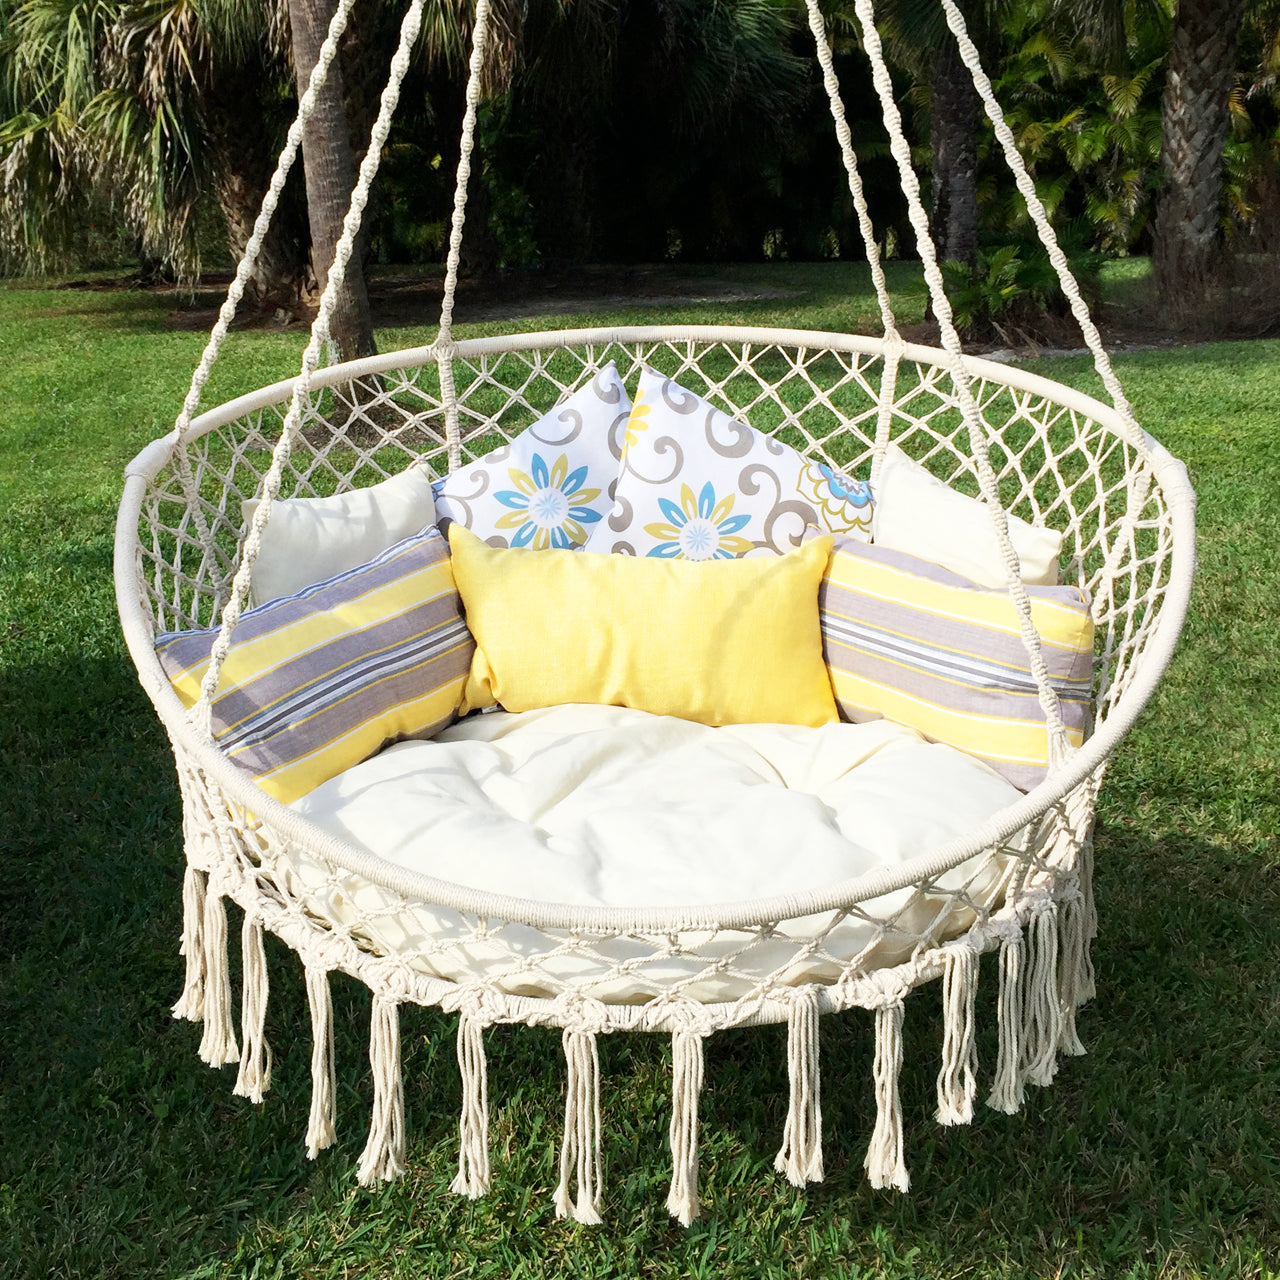 Bliss Hammocks 55-inch 2 Person Bohemian Style Macramé Swing Chair with Pillows hanging outside above the grass.